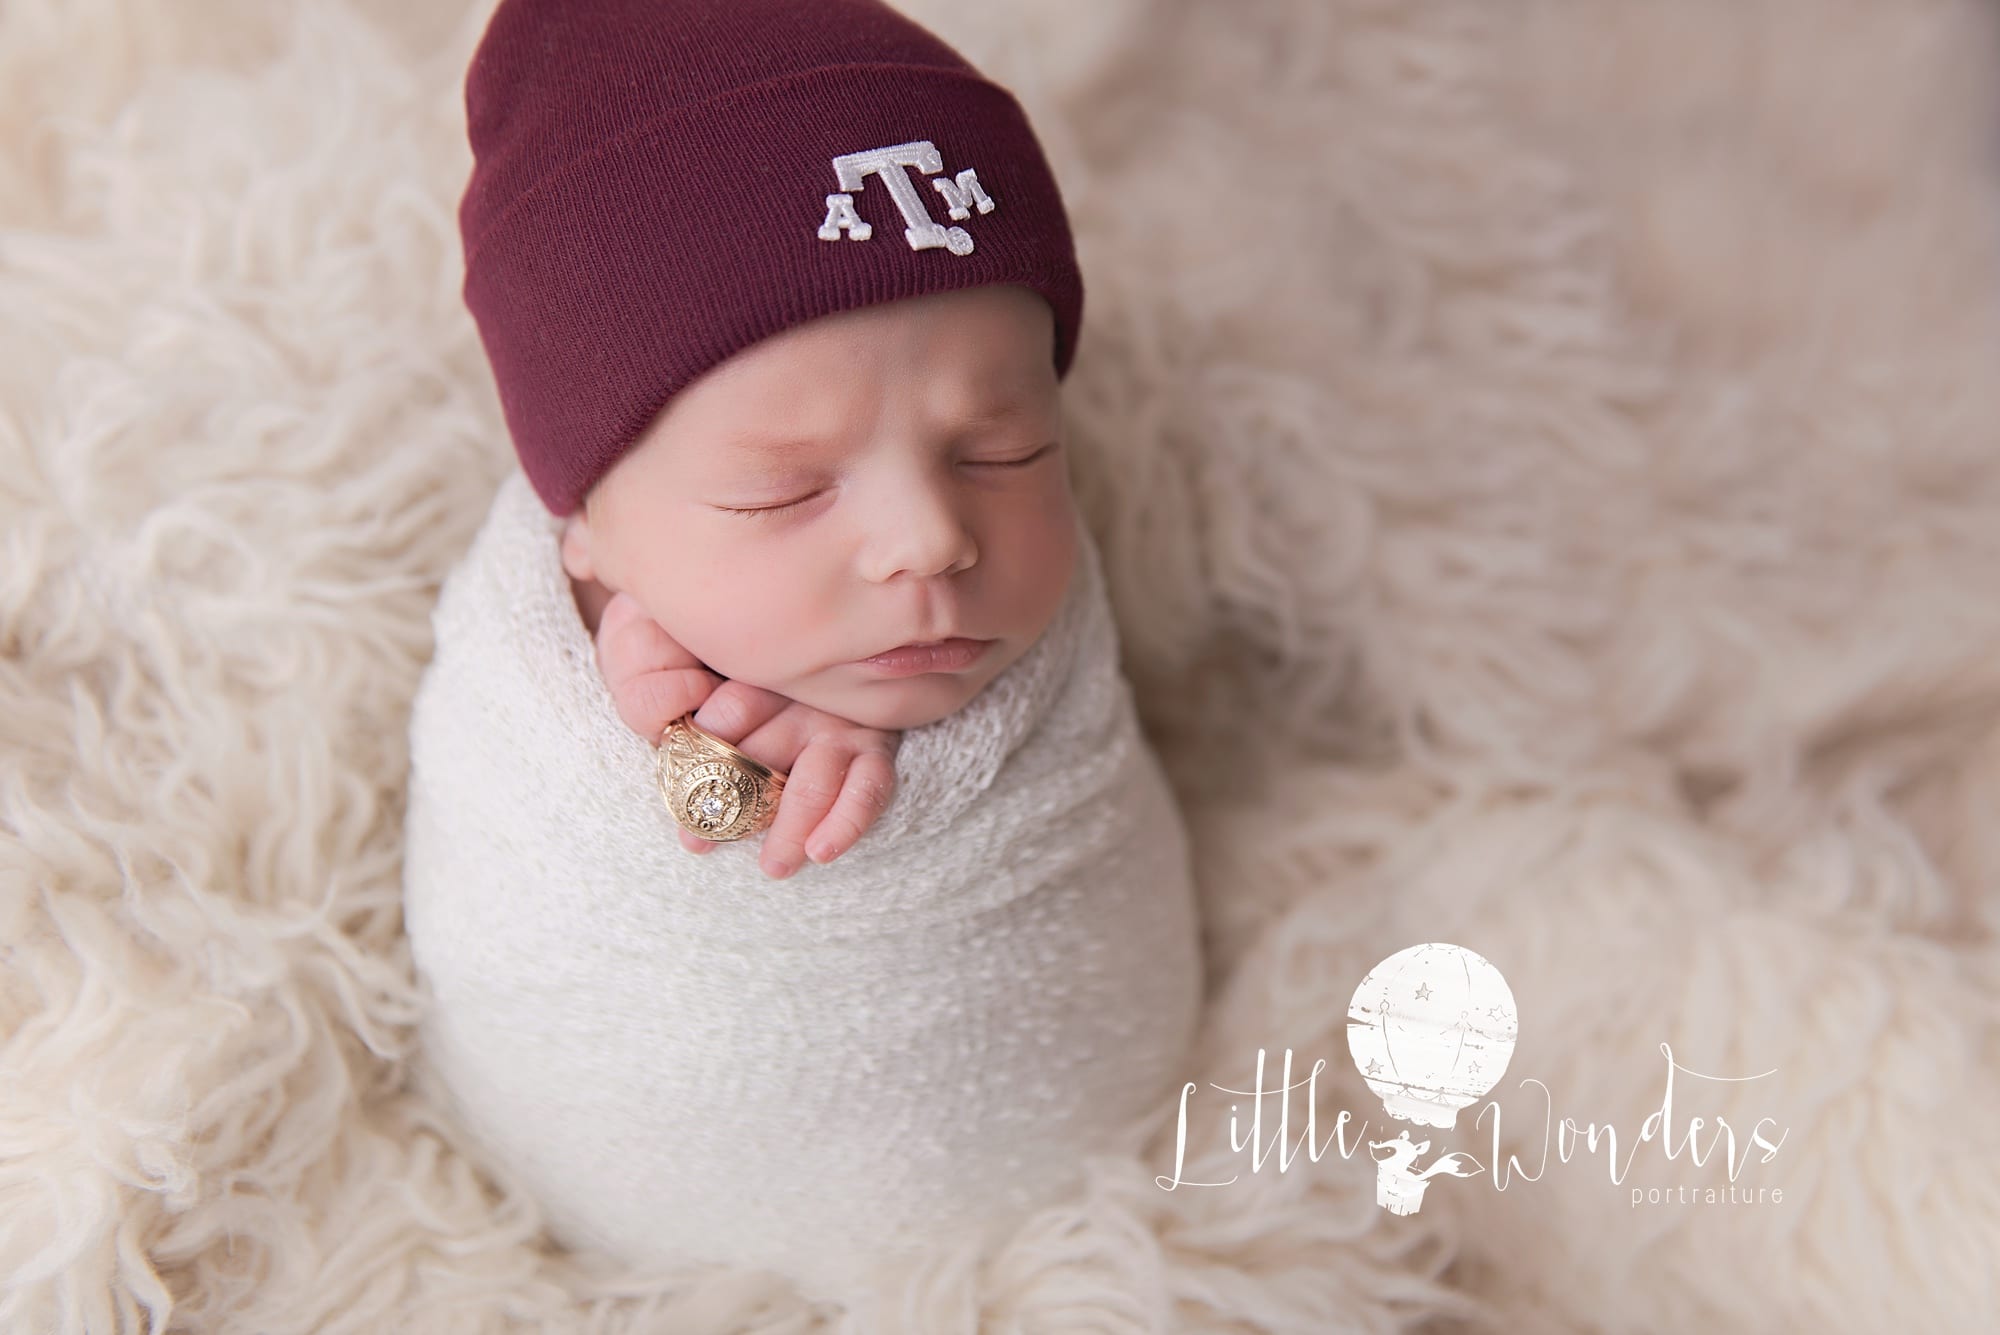 baby with a&m hat and dads ring